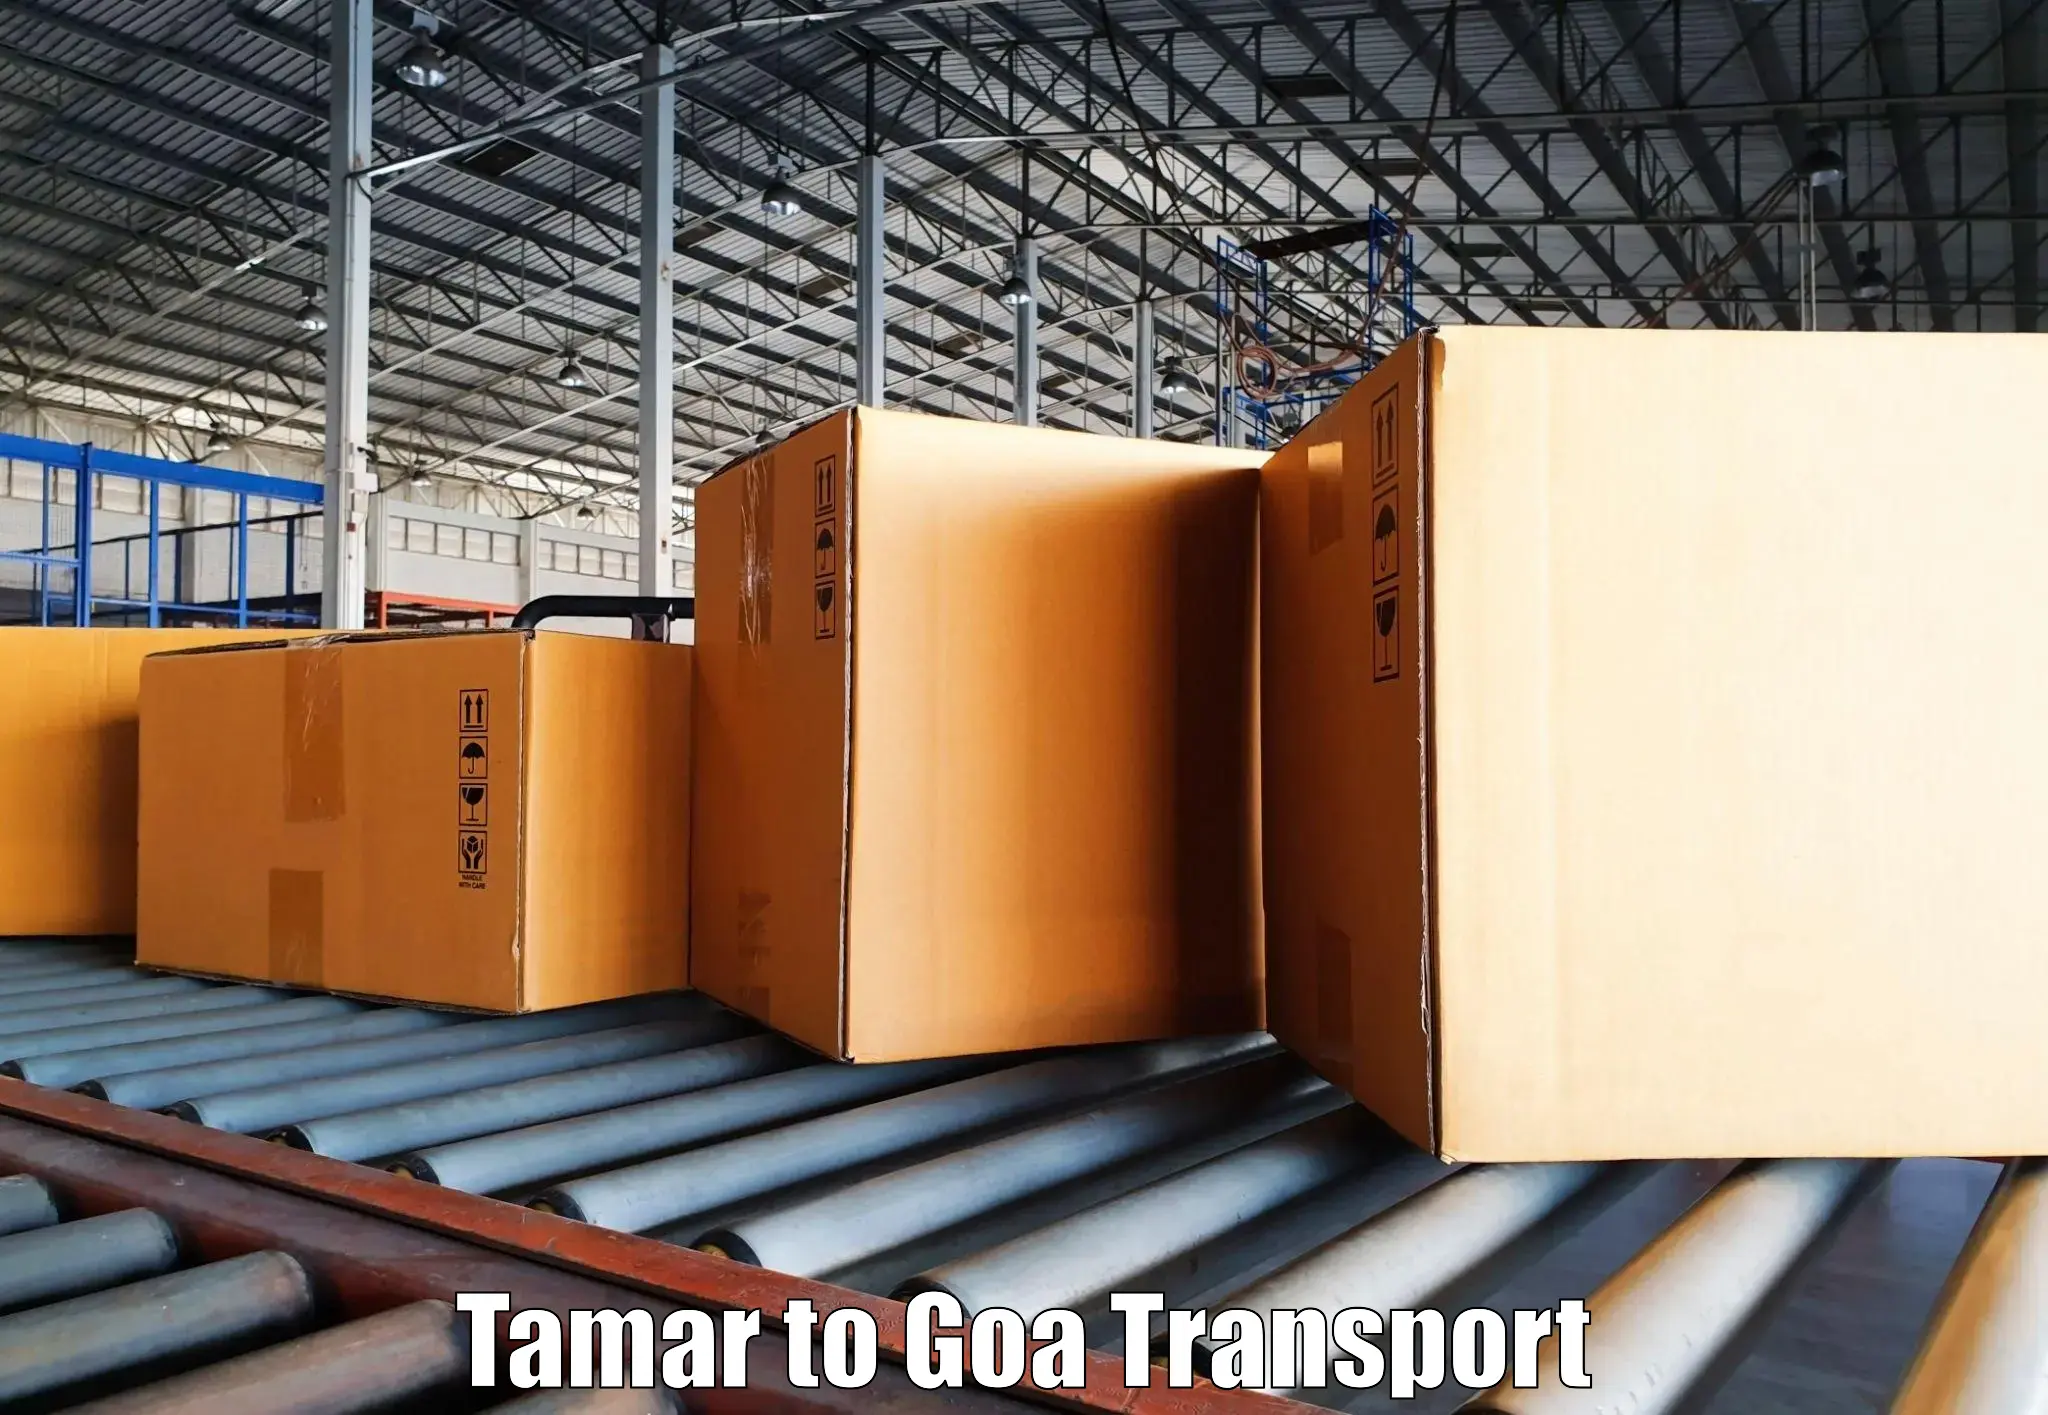 Commercial transport service Tamar to Goa